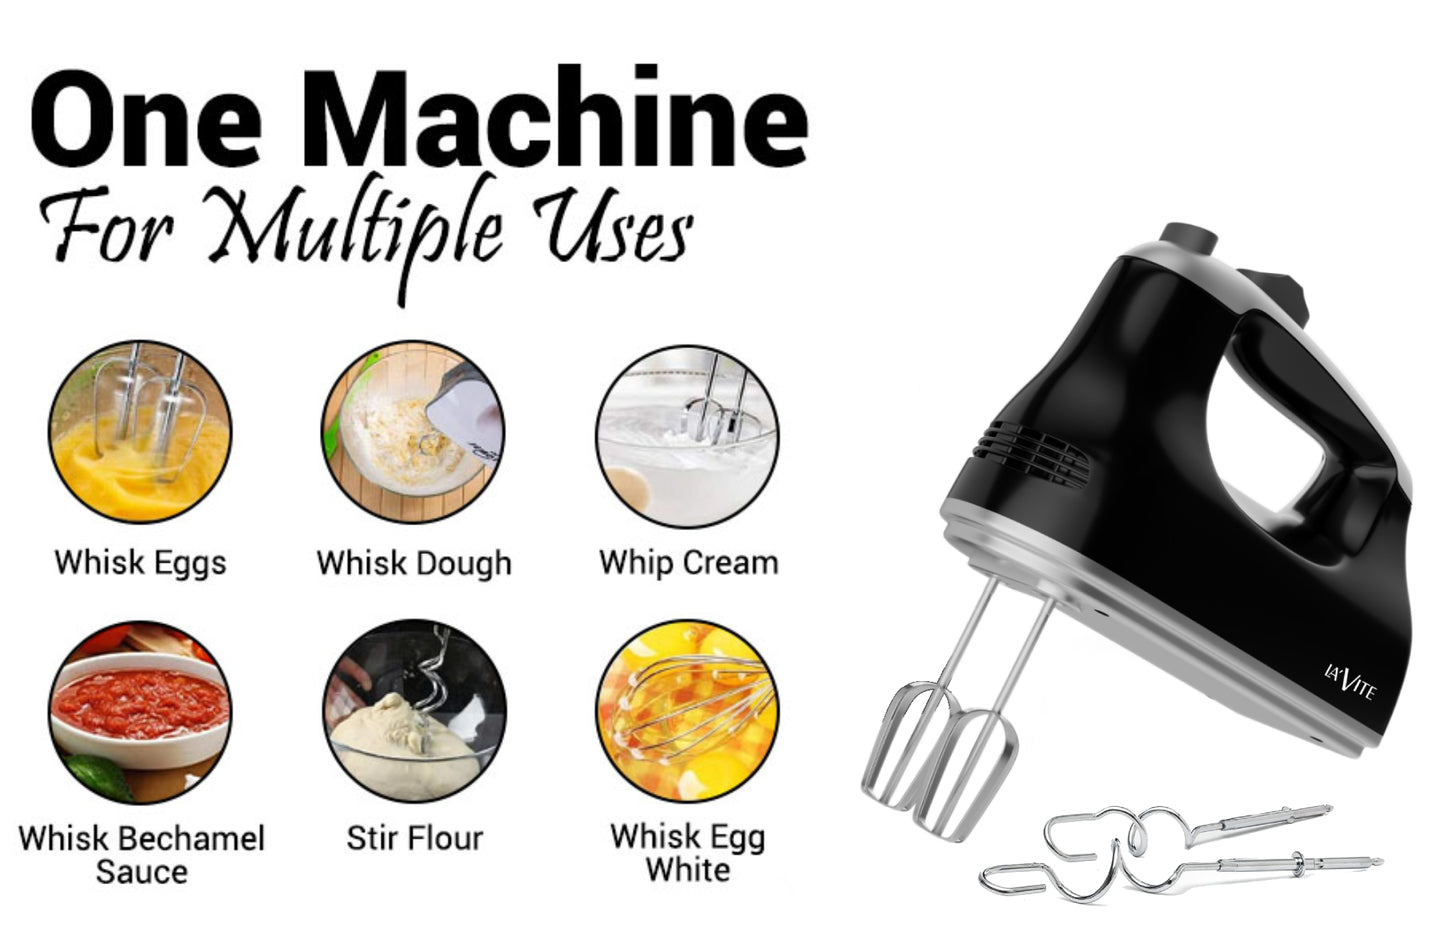 LA' FORTE Hand Mixer 300 W with Dough hook Beater hook and Mounting Bracket